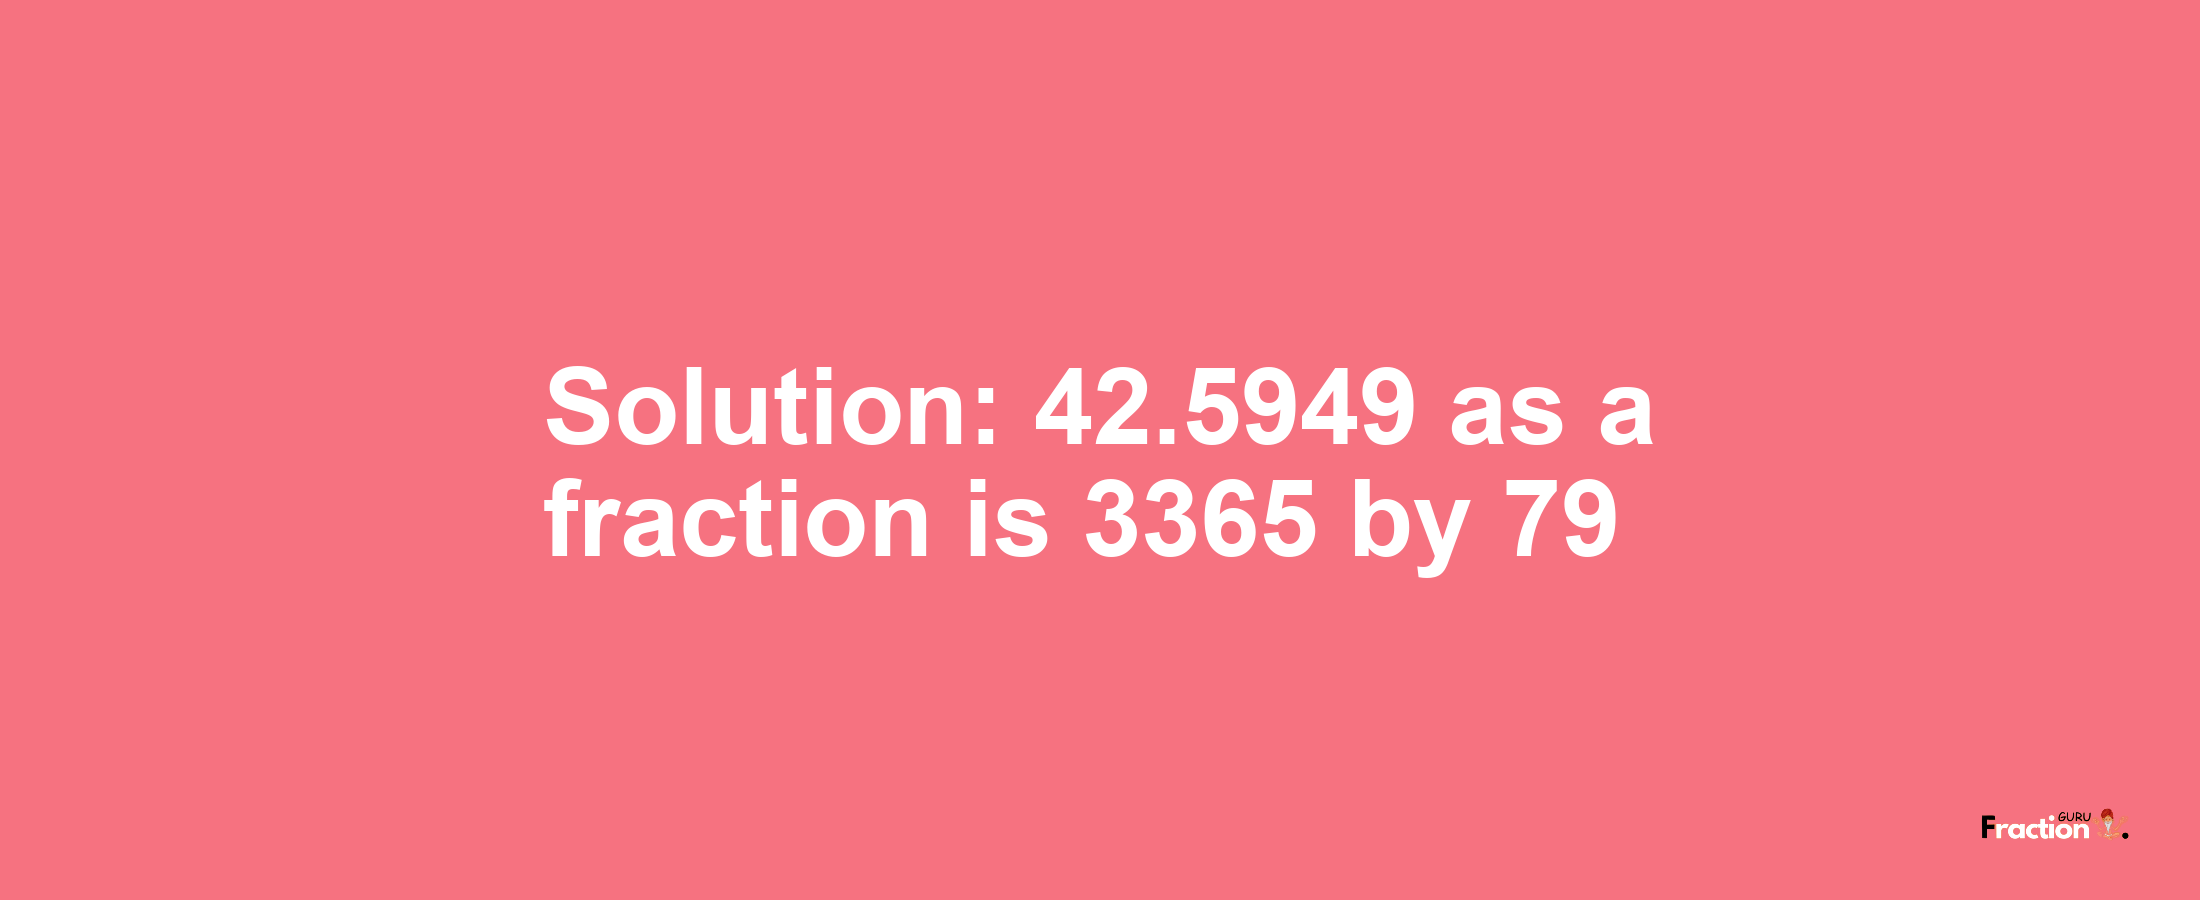 Solution:42.5949 as a fraction is 3365/79